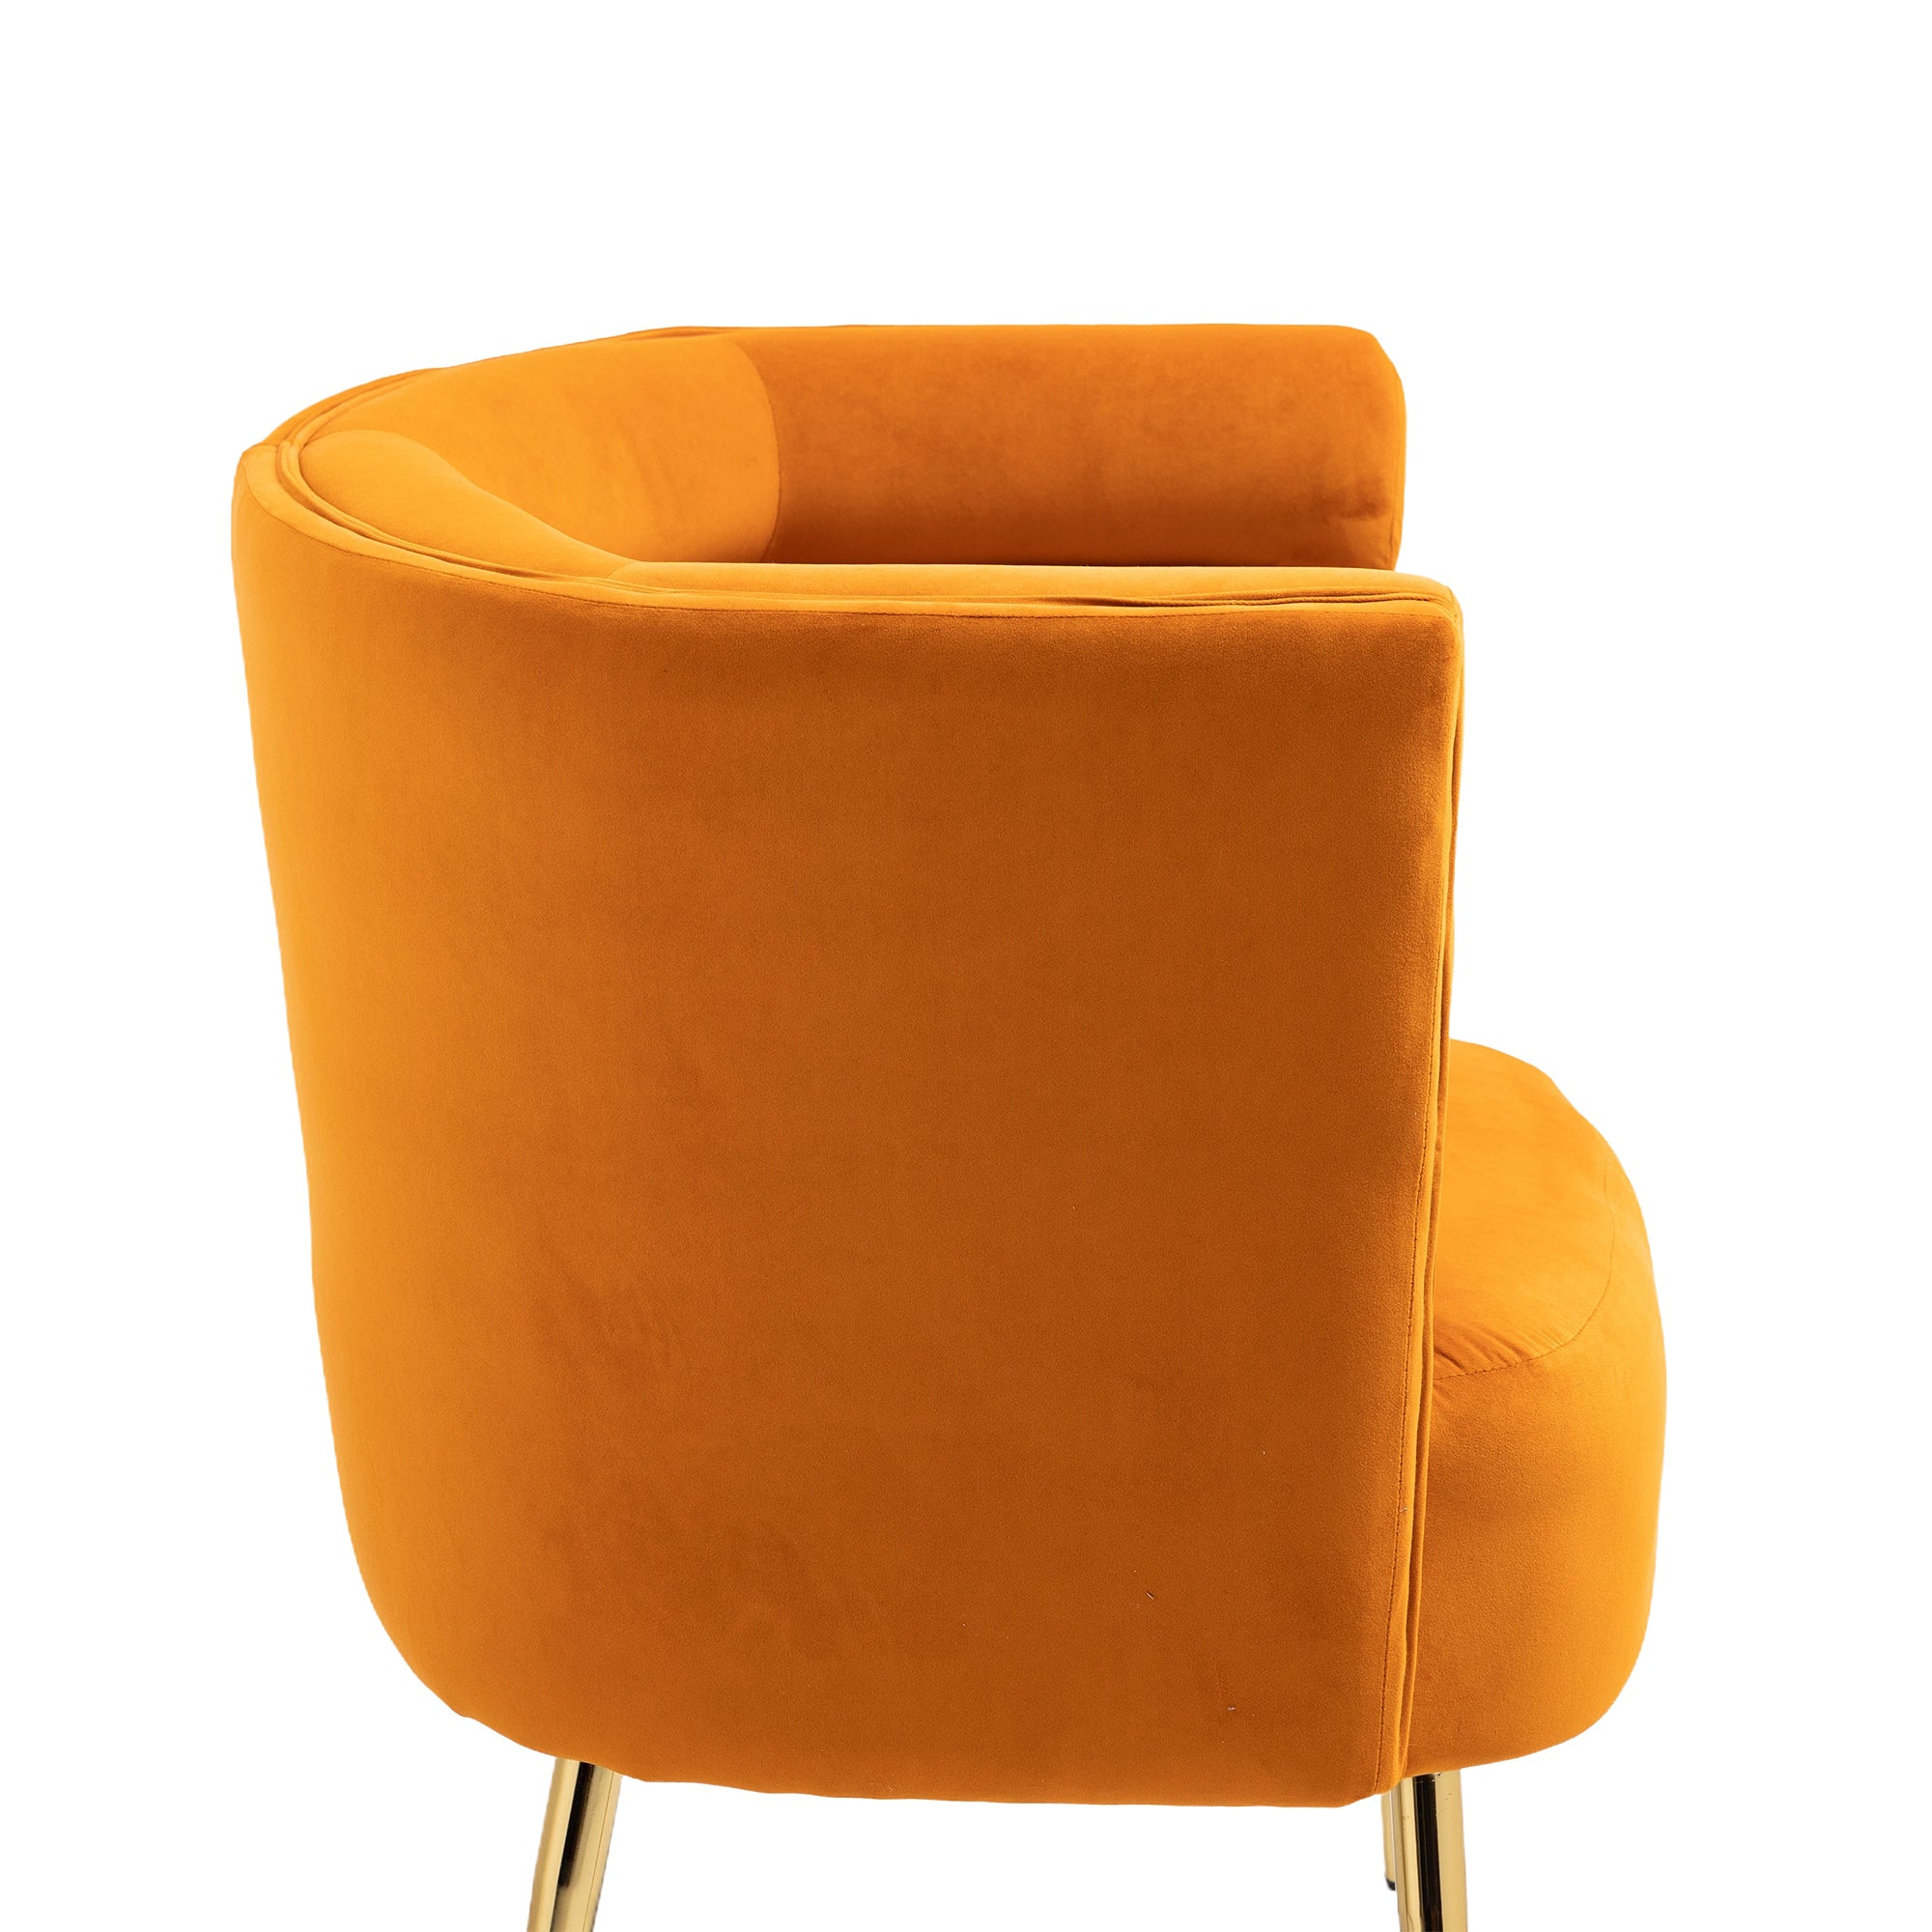 COOLMORE Accent Chair ,leisure single chair with orange-velvet